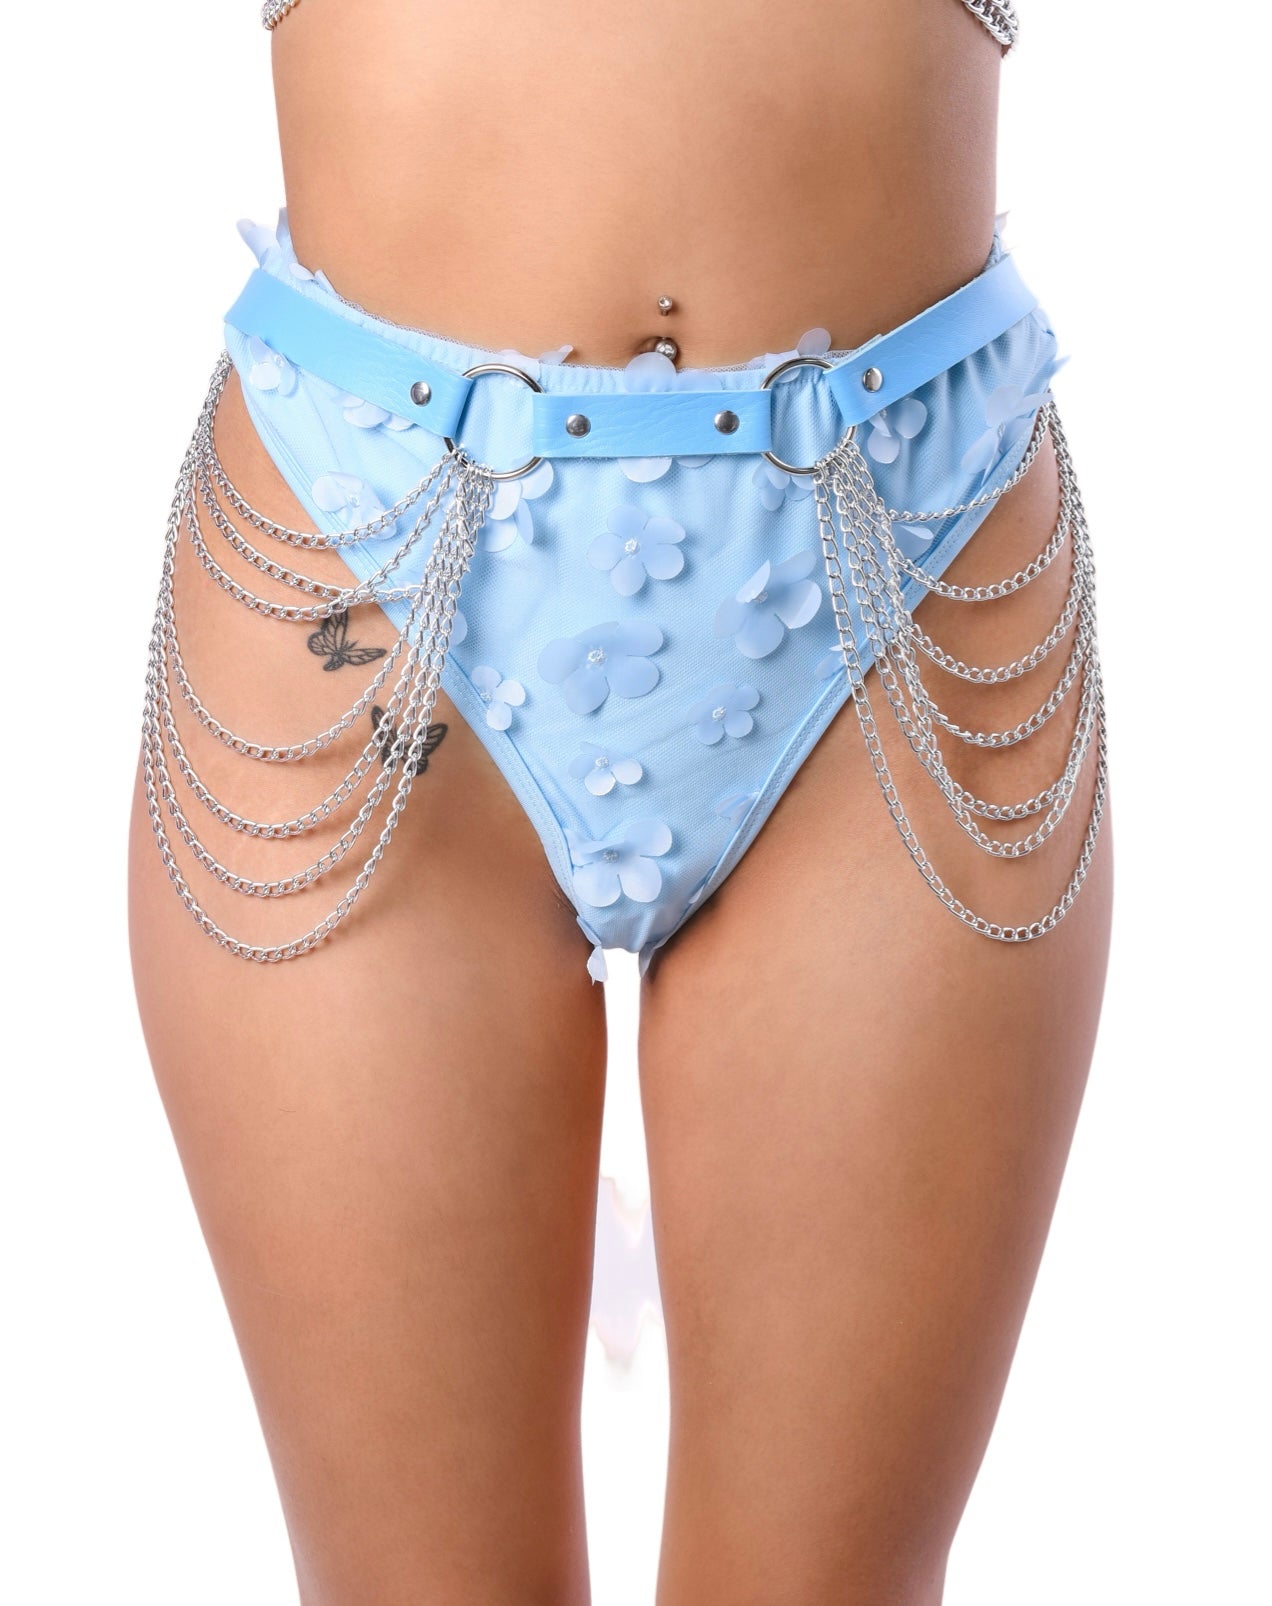 Baby Blue Harness Chain Set